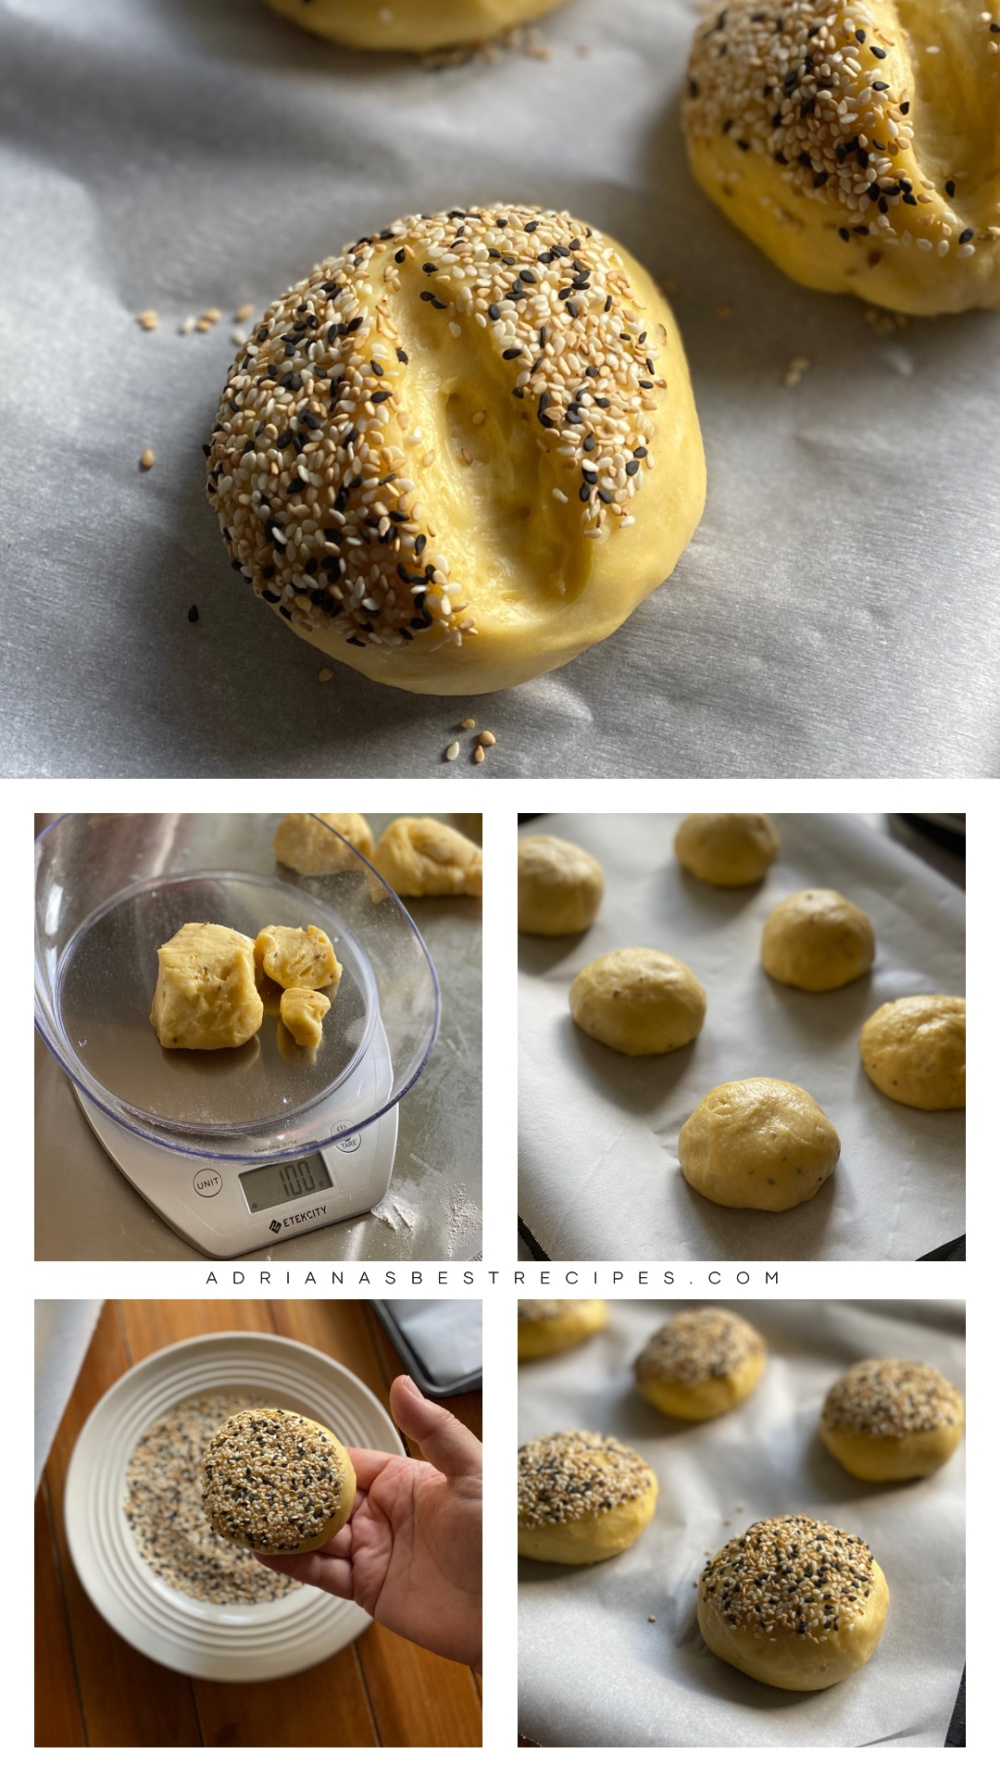 Step by step process on how to add the sesame seeds